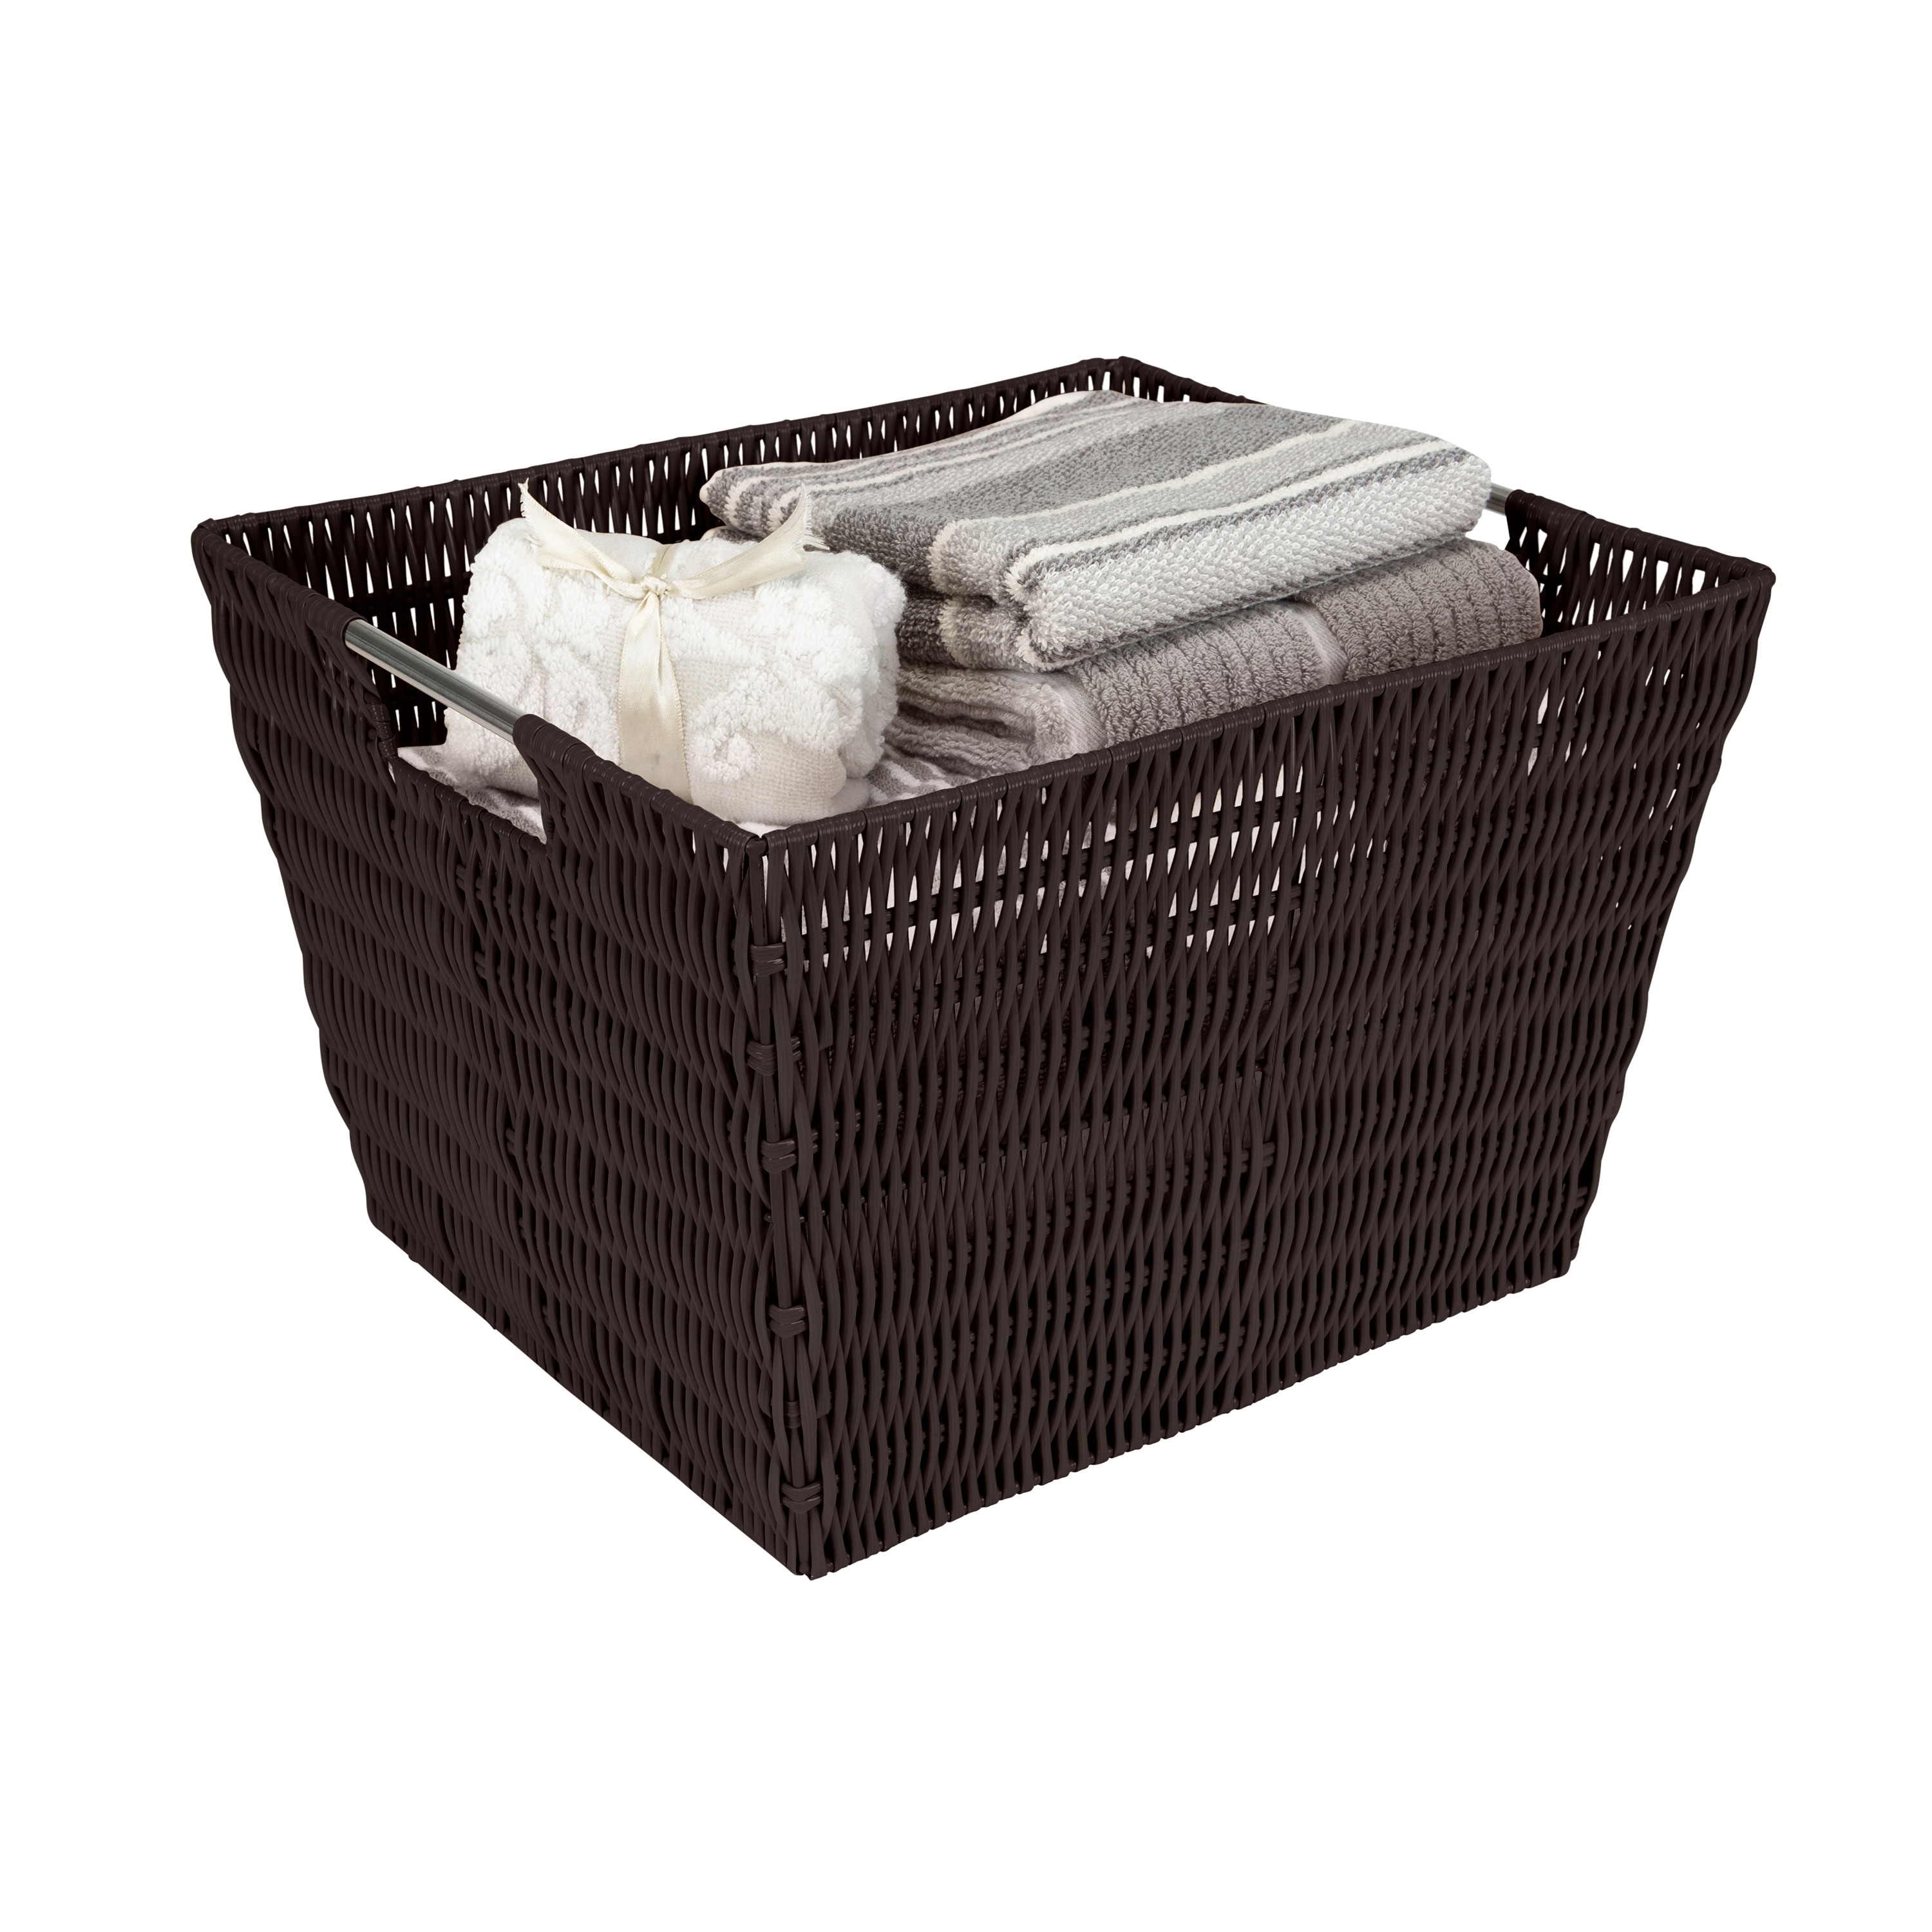 https://ak1.ostkcdn.com/images/products/is/images/direct/27c69ba63625f7c372287b50e1c411dc152bac8f/Simplify-Large-Rattan-Storage-Tote-Basket-in-Charcoal.jpg